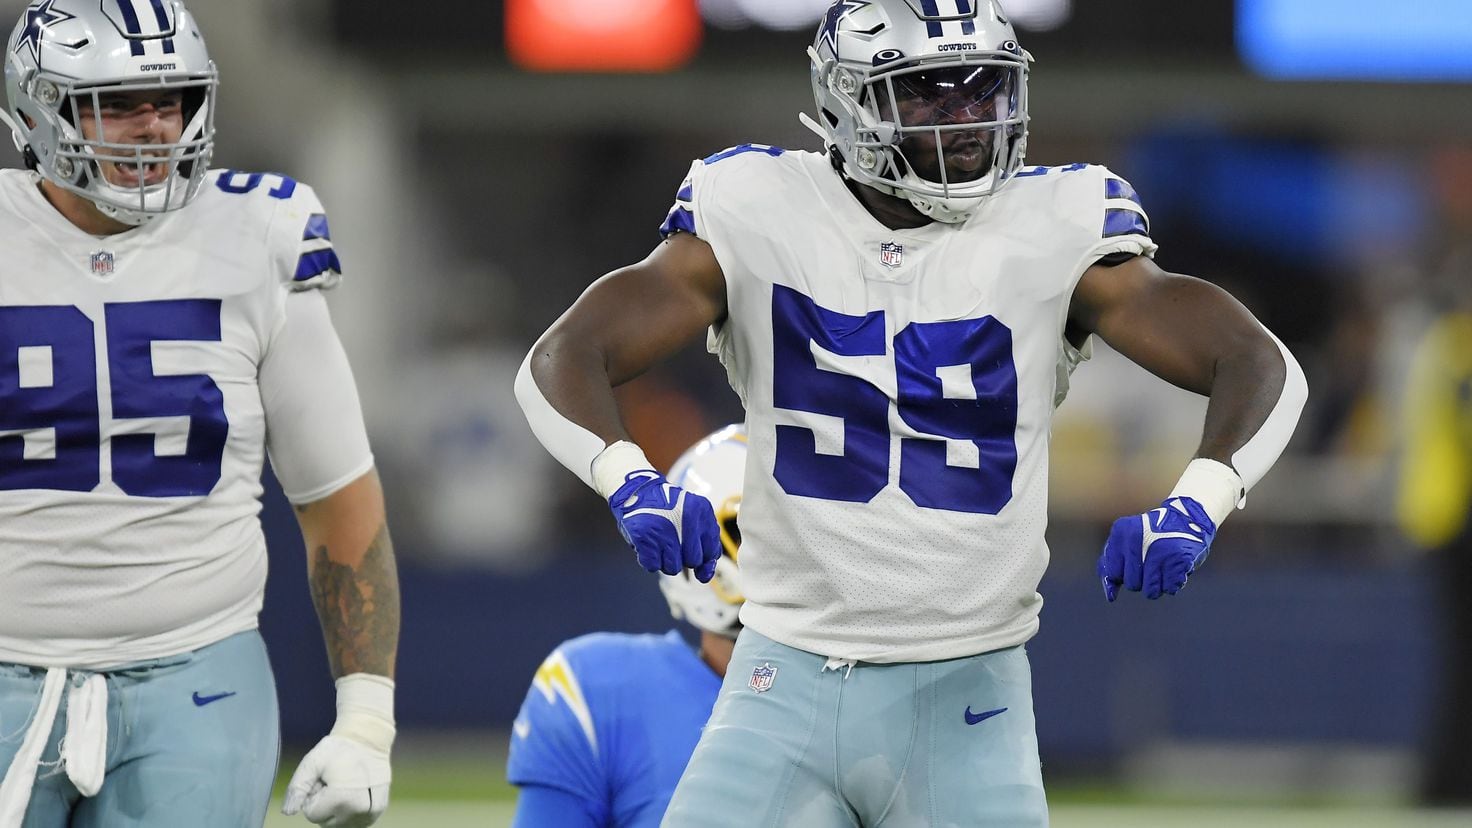 Rams game prime opportunity for Cowboys Trevon Diggs to show his